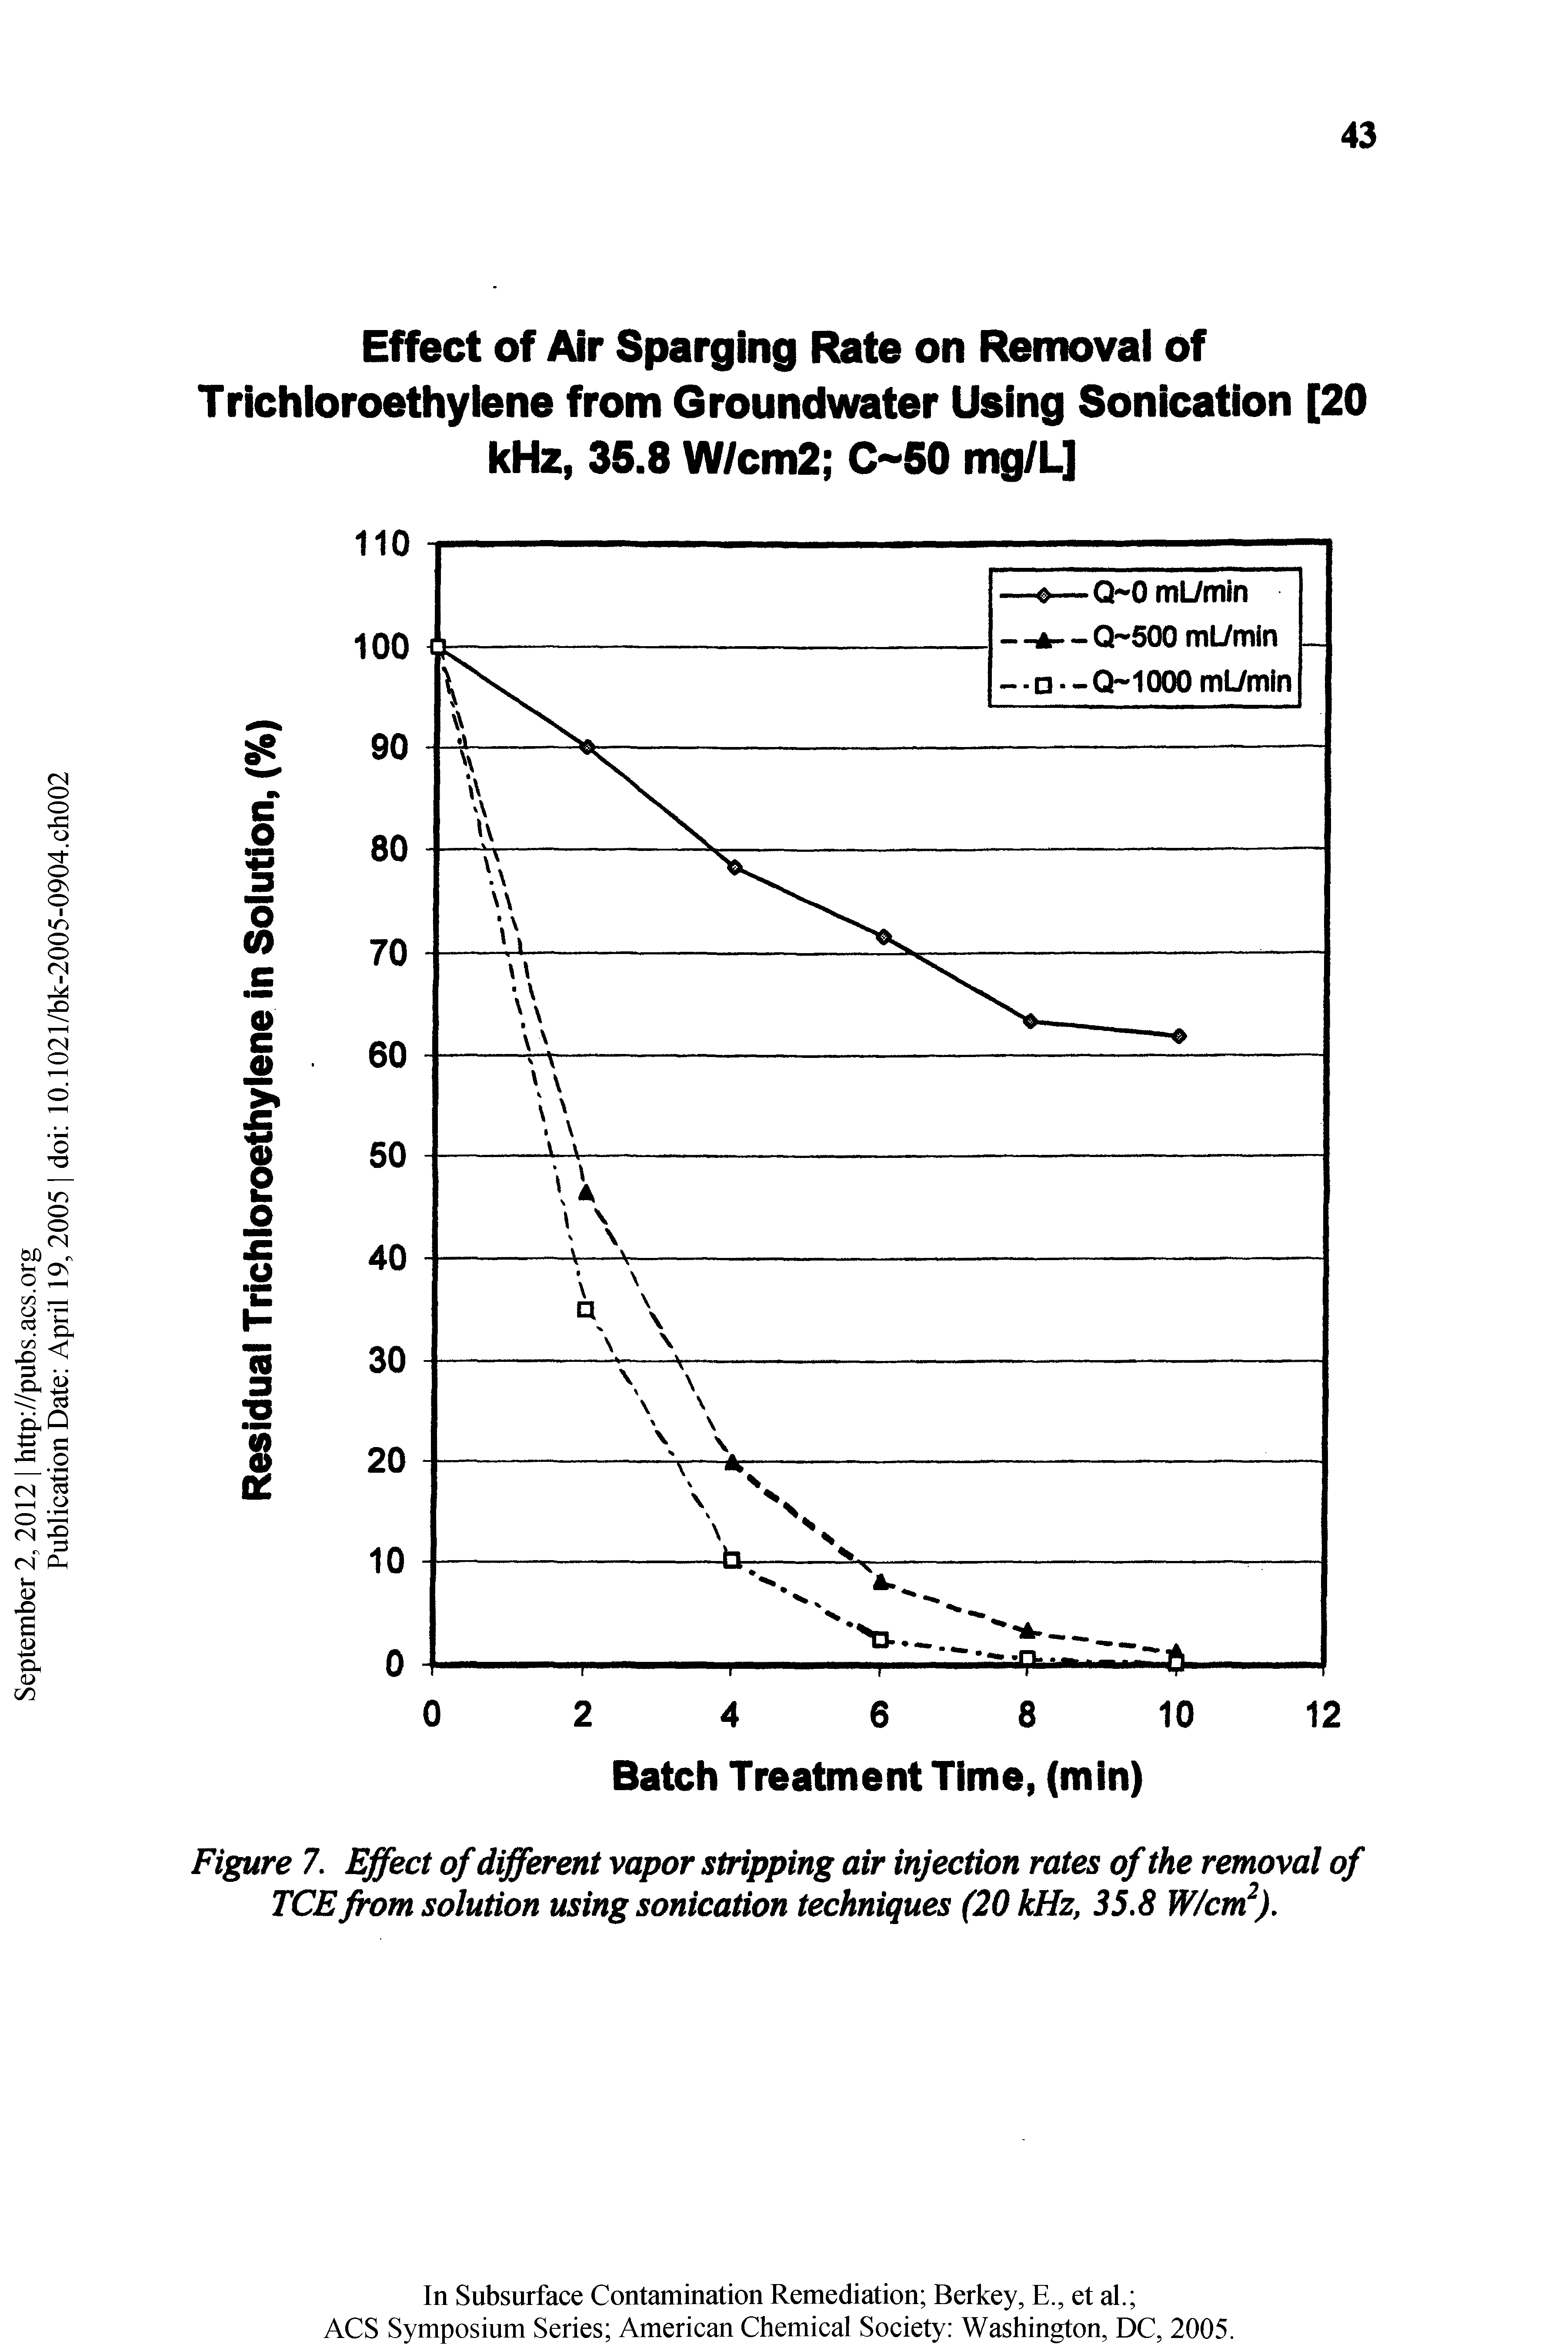 Figure 7. Effect of different vapor stripping air injection rates of the removal of TCE from solution using sonication techniques (20 kHz, 35.8 W/cm ).